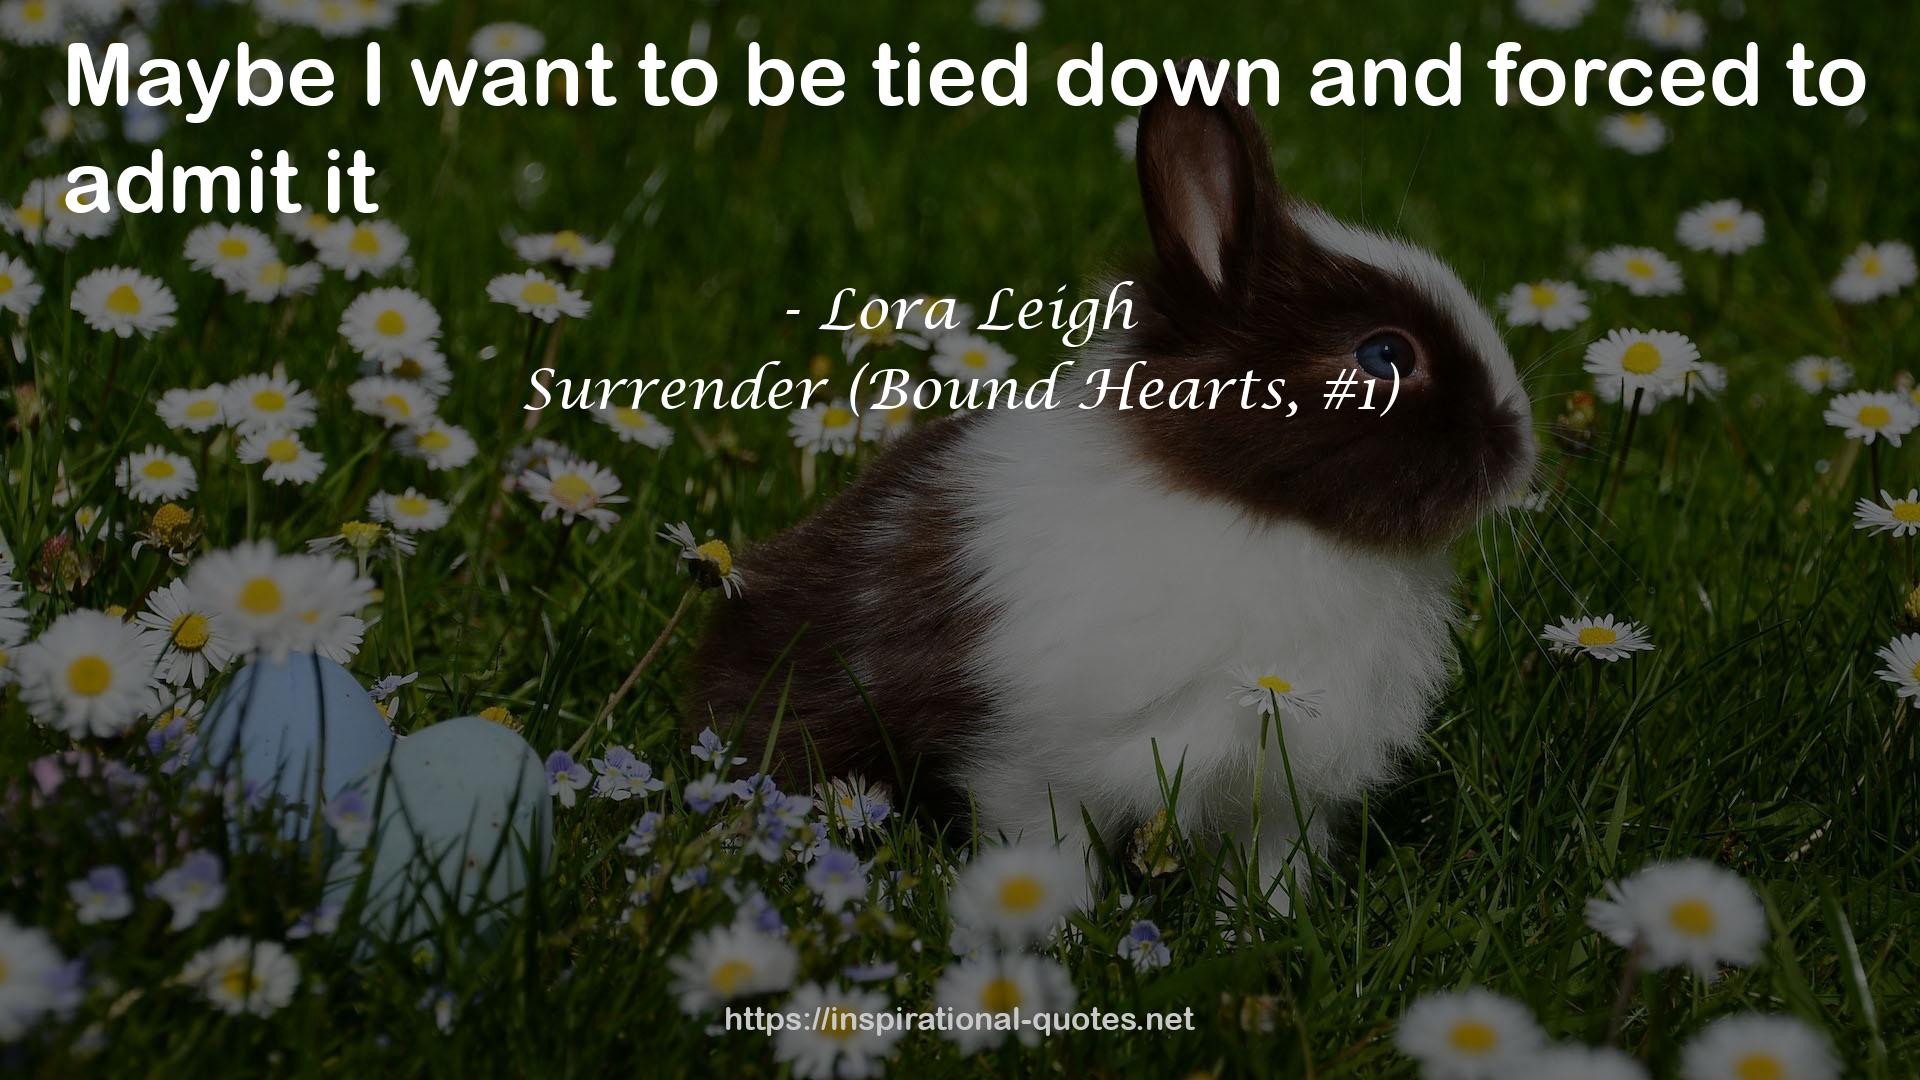 Surrender (Bound Hearts, #1) QUOTES